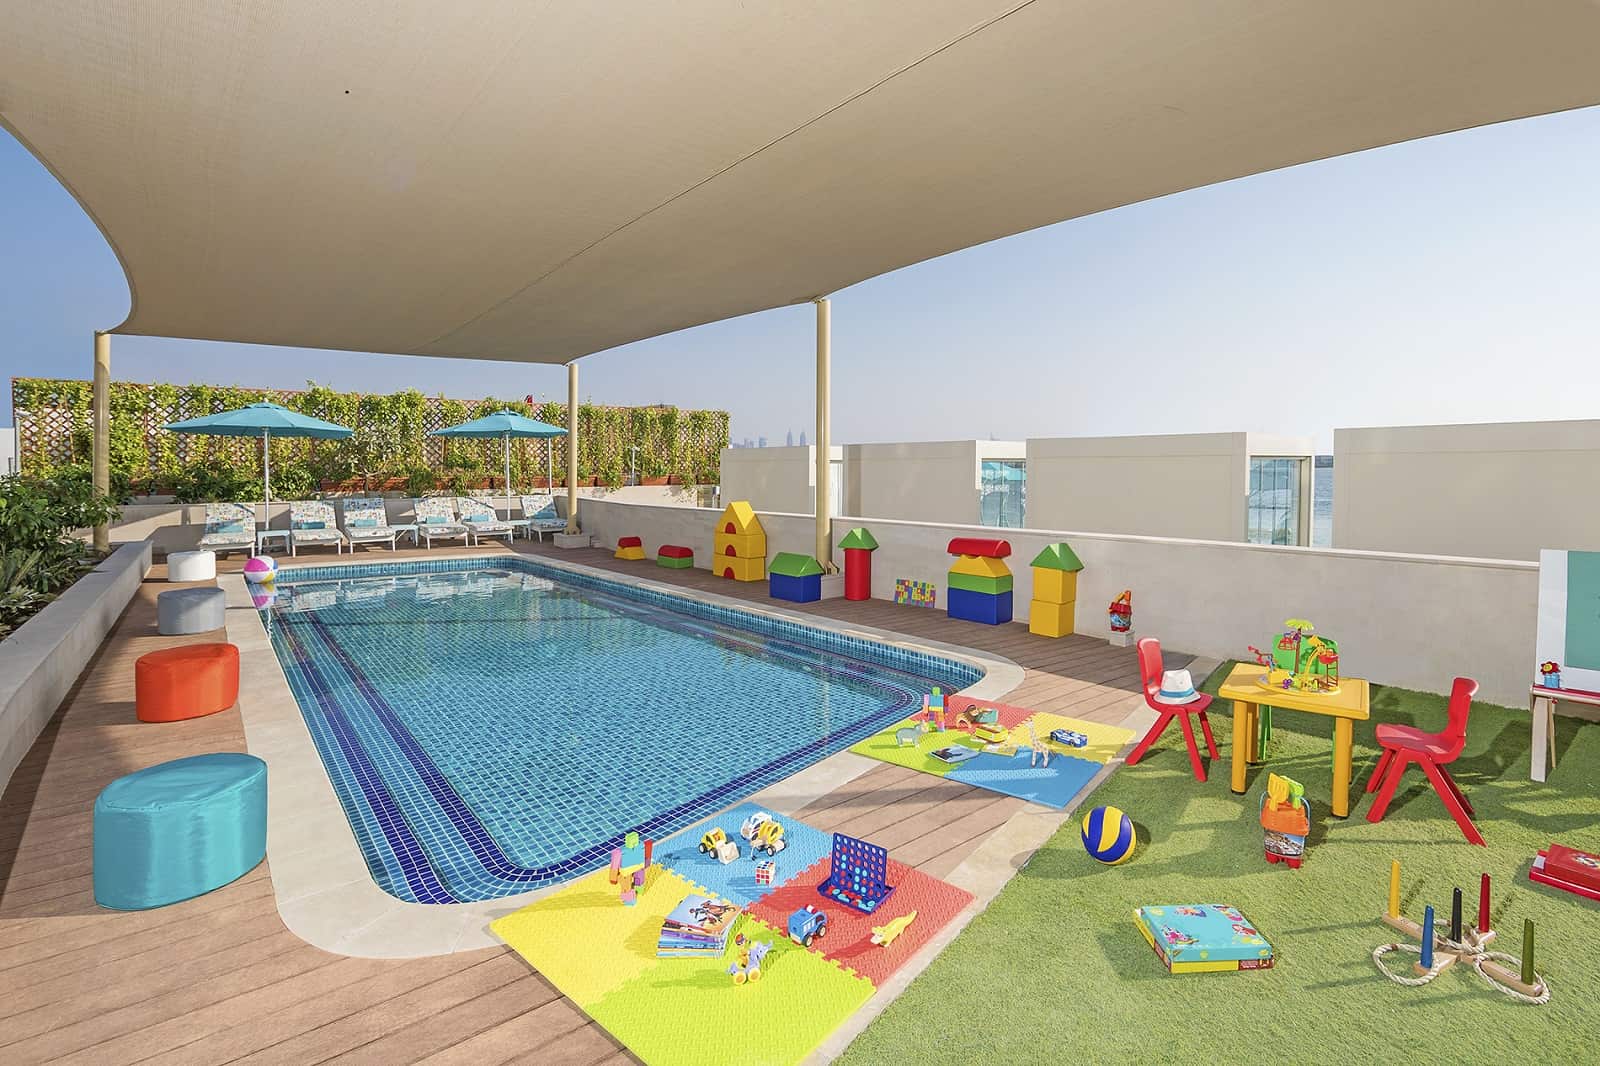 {"id":68,"facility_id":35,"lang_id":1,"hotel_id":201000003,"name":"RAYYA KIDS' CLUB","slug":"rayya-kids-club","description":"<p>A fun and exciting environment for our younger guests, supervised by certified caregivers, with dedicated fit and relax-zones, Rayya Kids&rsquo; Club offers a wide variety of engaging activities and workshops to keep children aged four to twelve years old entertained throughout the day. Rayya Kids&rsquo; Club also hosts special healthy summer camps, weight management programmes and other events to introduce children to the benefits of healthy living.<\/p>","sort":4,"status":1,"created_at":"2019-11-13T11:22:04.000000Z","updated_at":"2019-11-14T13:46:58.000000Z","deleted_at":null,"image_slider":{"id":1209,"lang_id":1,"image_sliderable_id":68,"image_sliderable_type":"App\\HotelFacility","image_slider":"uploads\/image-slider\/840389ffa3a045775db88230a7b5bf8f1574058033.jpg","name":null,"sub_name":null,"content":null,"status":1,"created_at":"2019-11-18T06:20:33.000000Z","updated_at":"2019-11-18T06:30:13.000000Z","sort":1,"is_mobile":0}}-slider